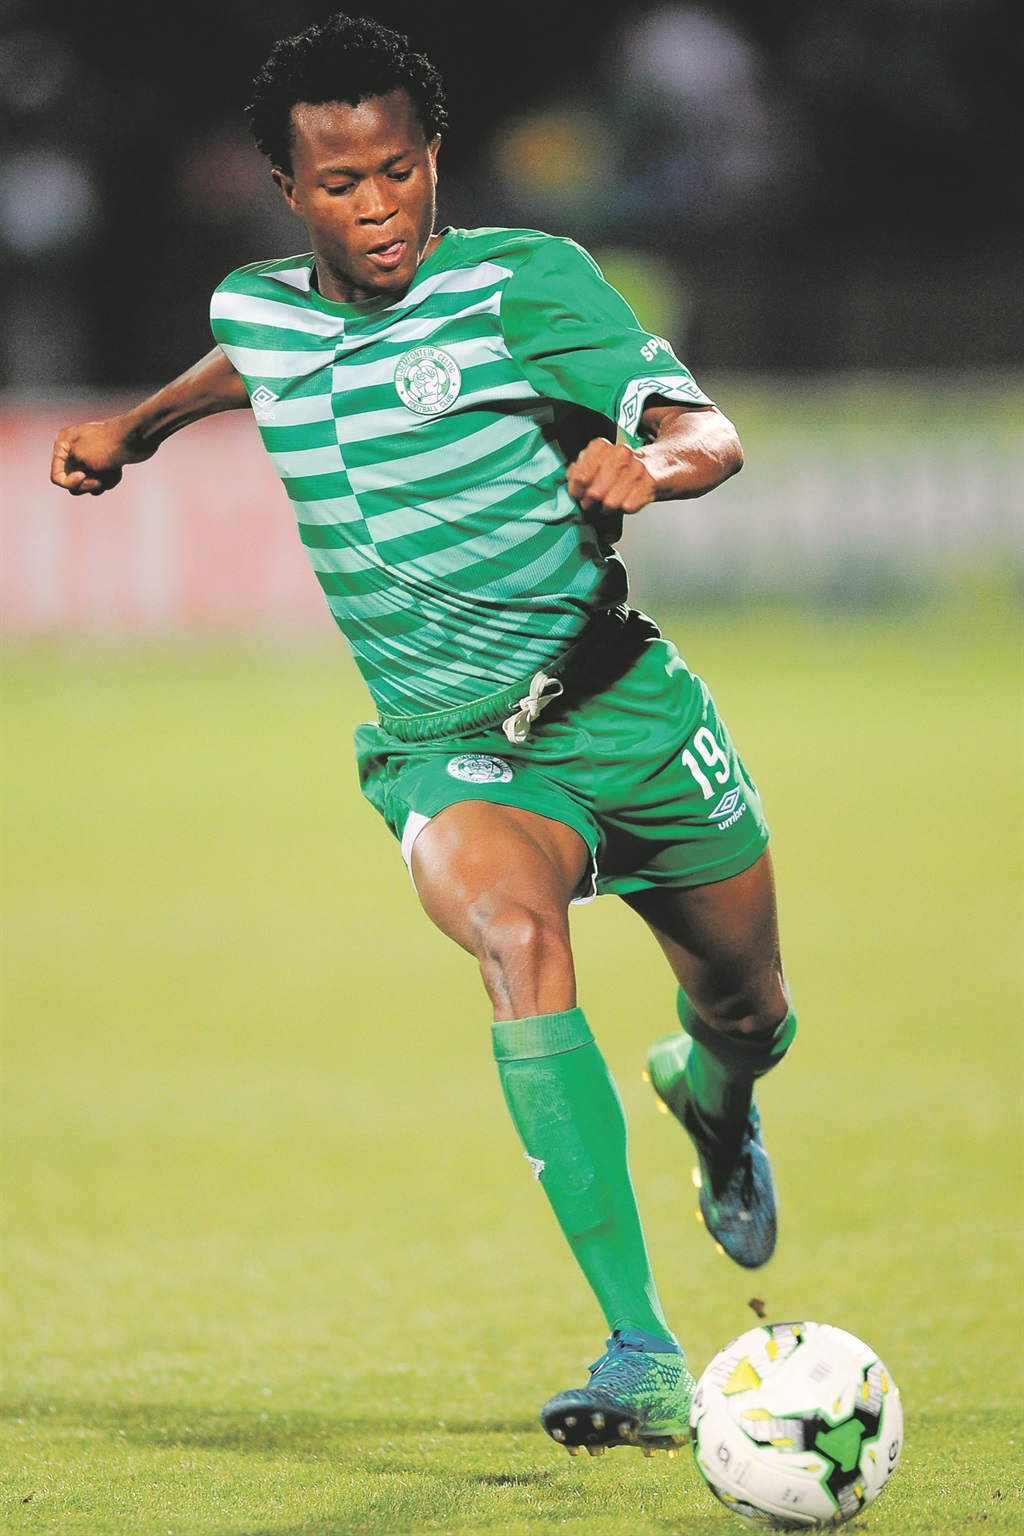 Bongani Sam is uncertain of his future at Bloemfontein Celtic. His contract ends in June PHOTO: Charlé Lombard / Gallo Images